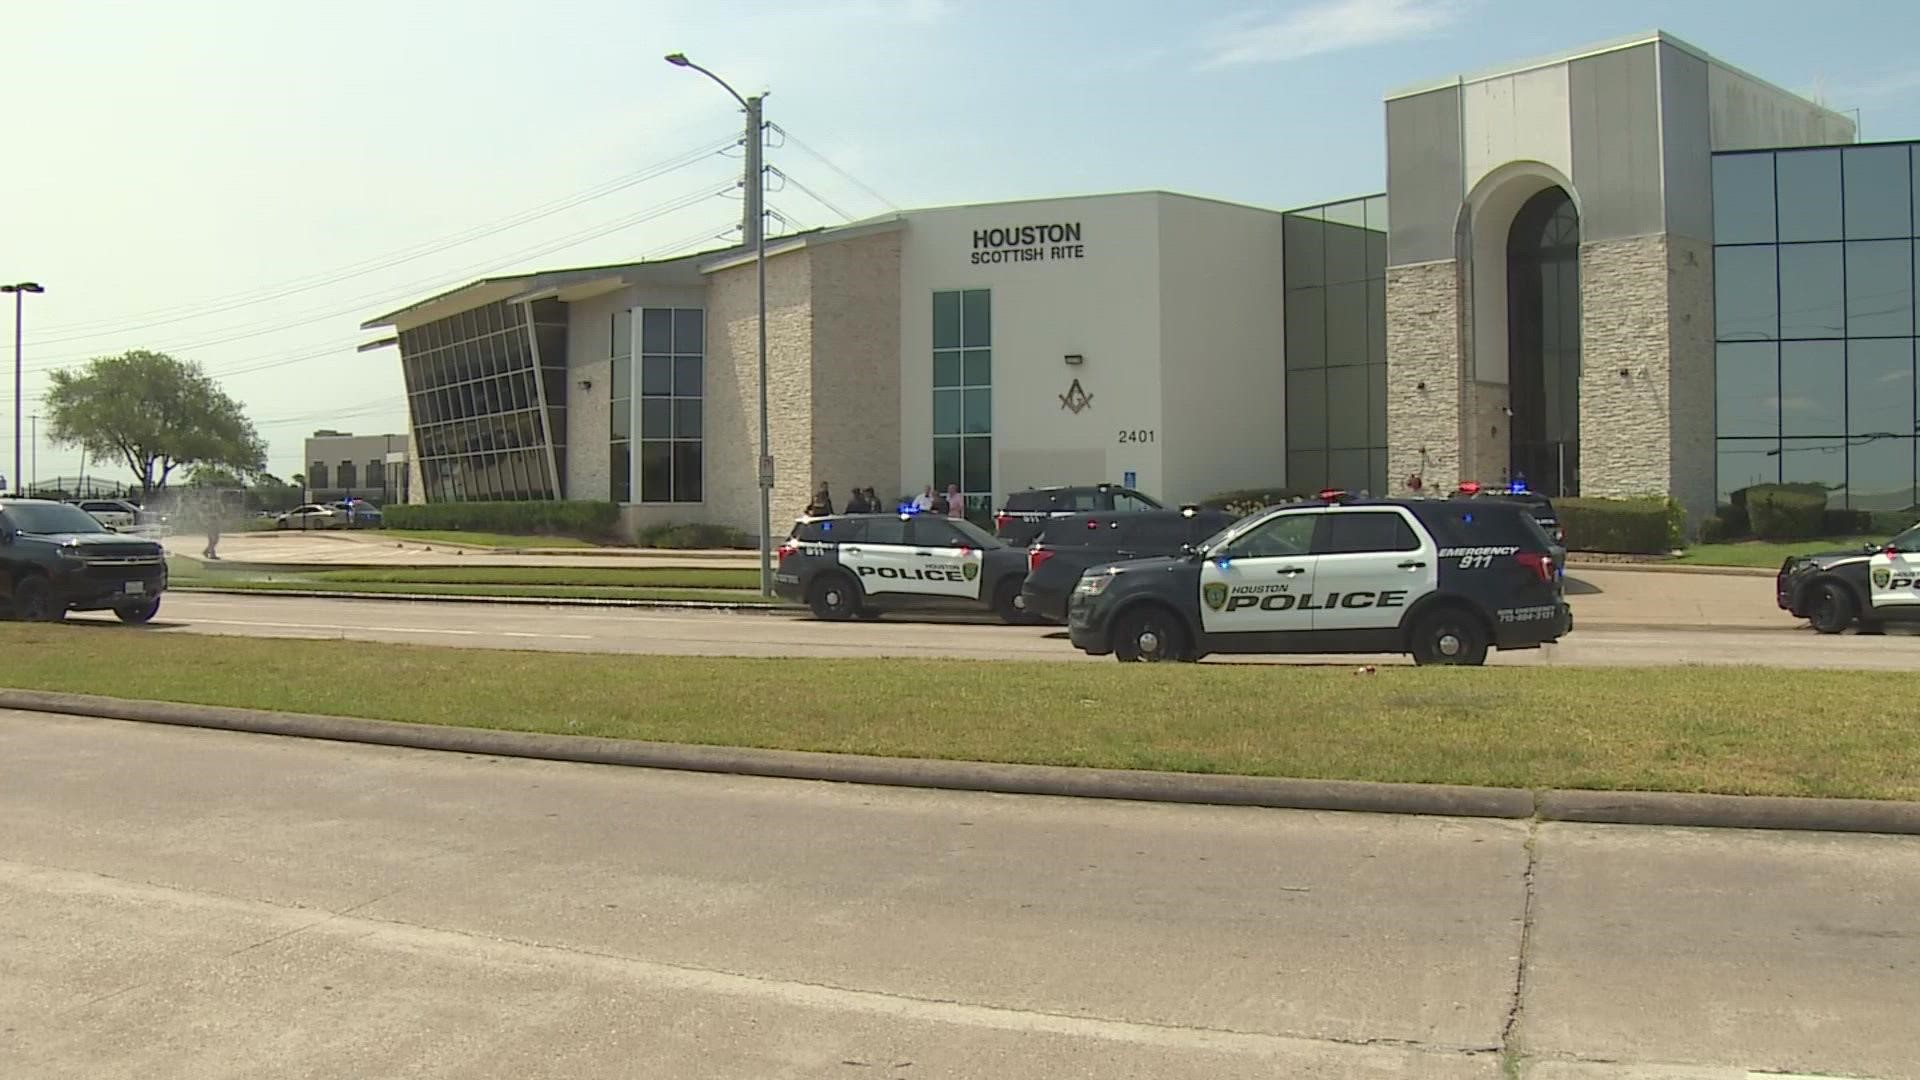 A man armed with a screwdriver is in custody after a brief hostage situation at the at Scottish Rite Masonic Center in southwest Houston.